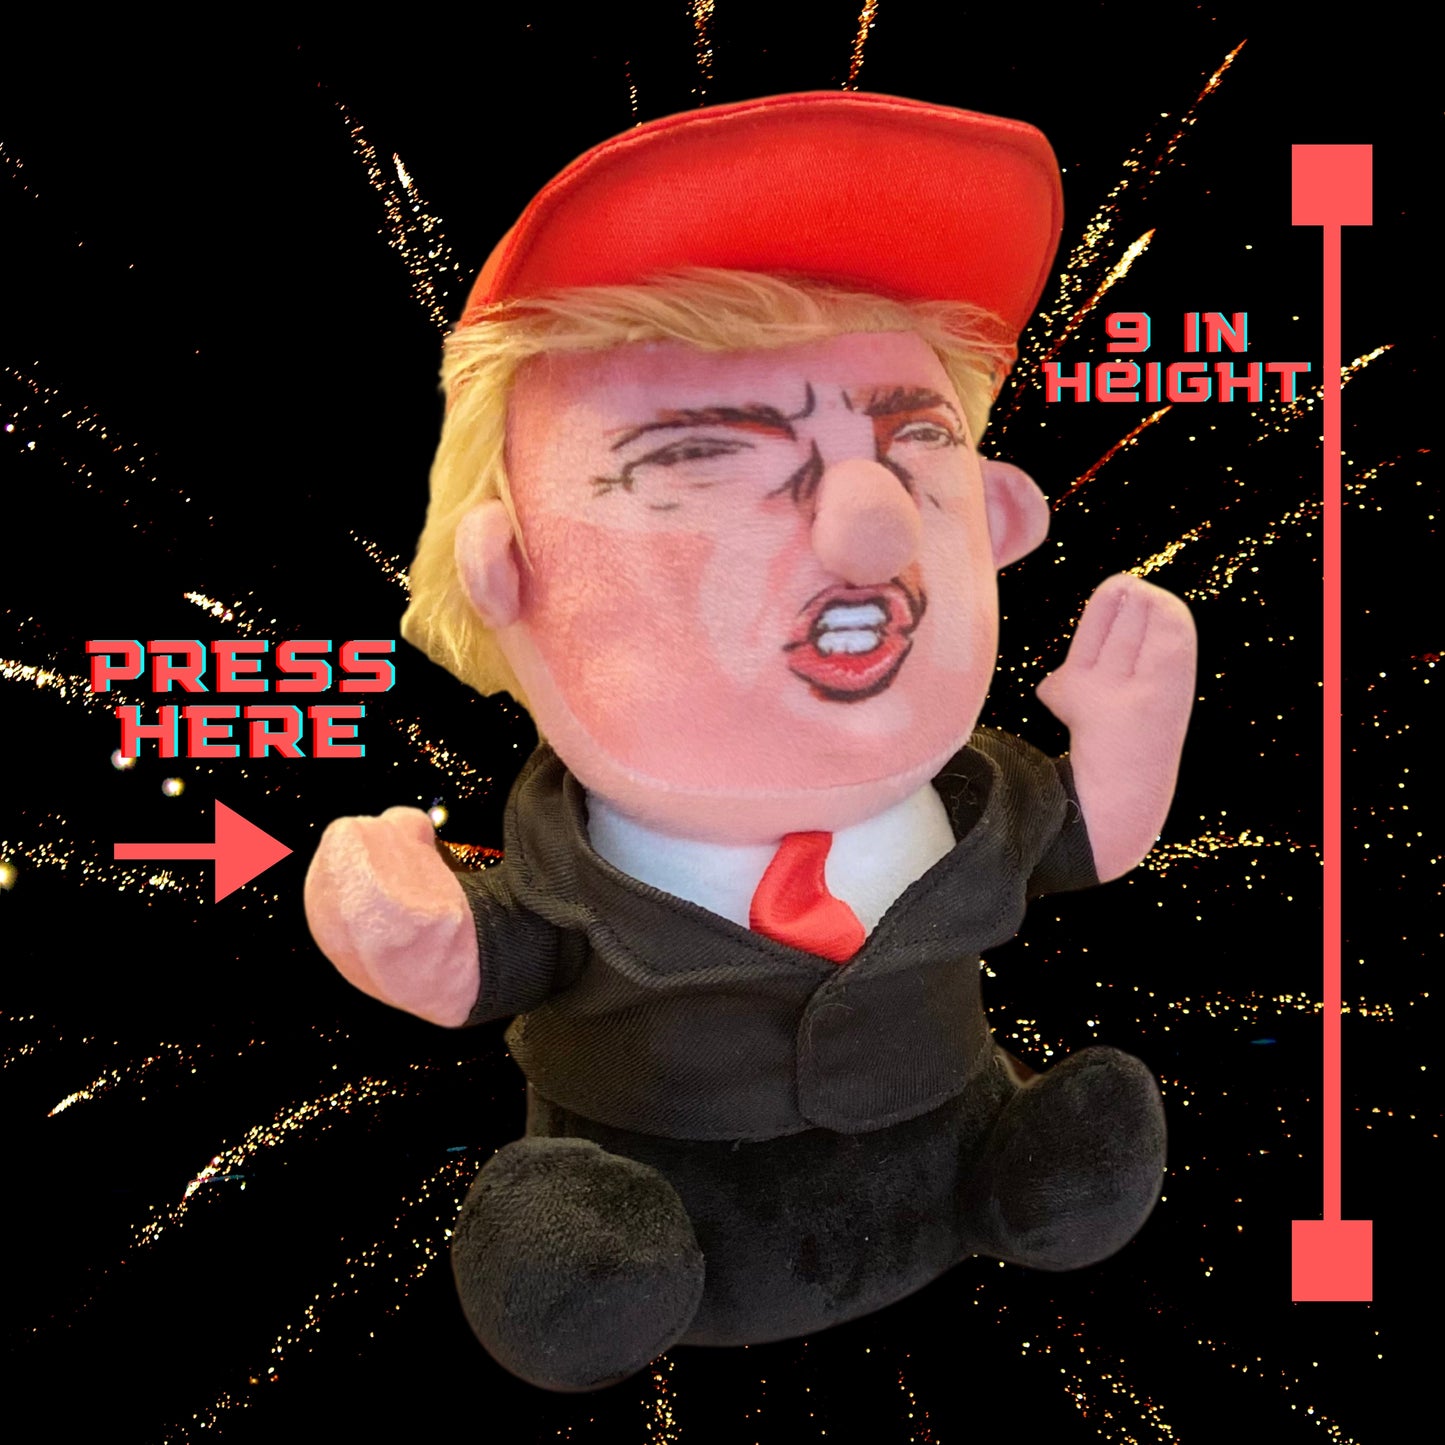 Donald Trump Talking Doll | Funny Trump Talking Figure Plush Toy with Make America Great Again Hat and 5 Quotes